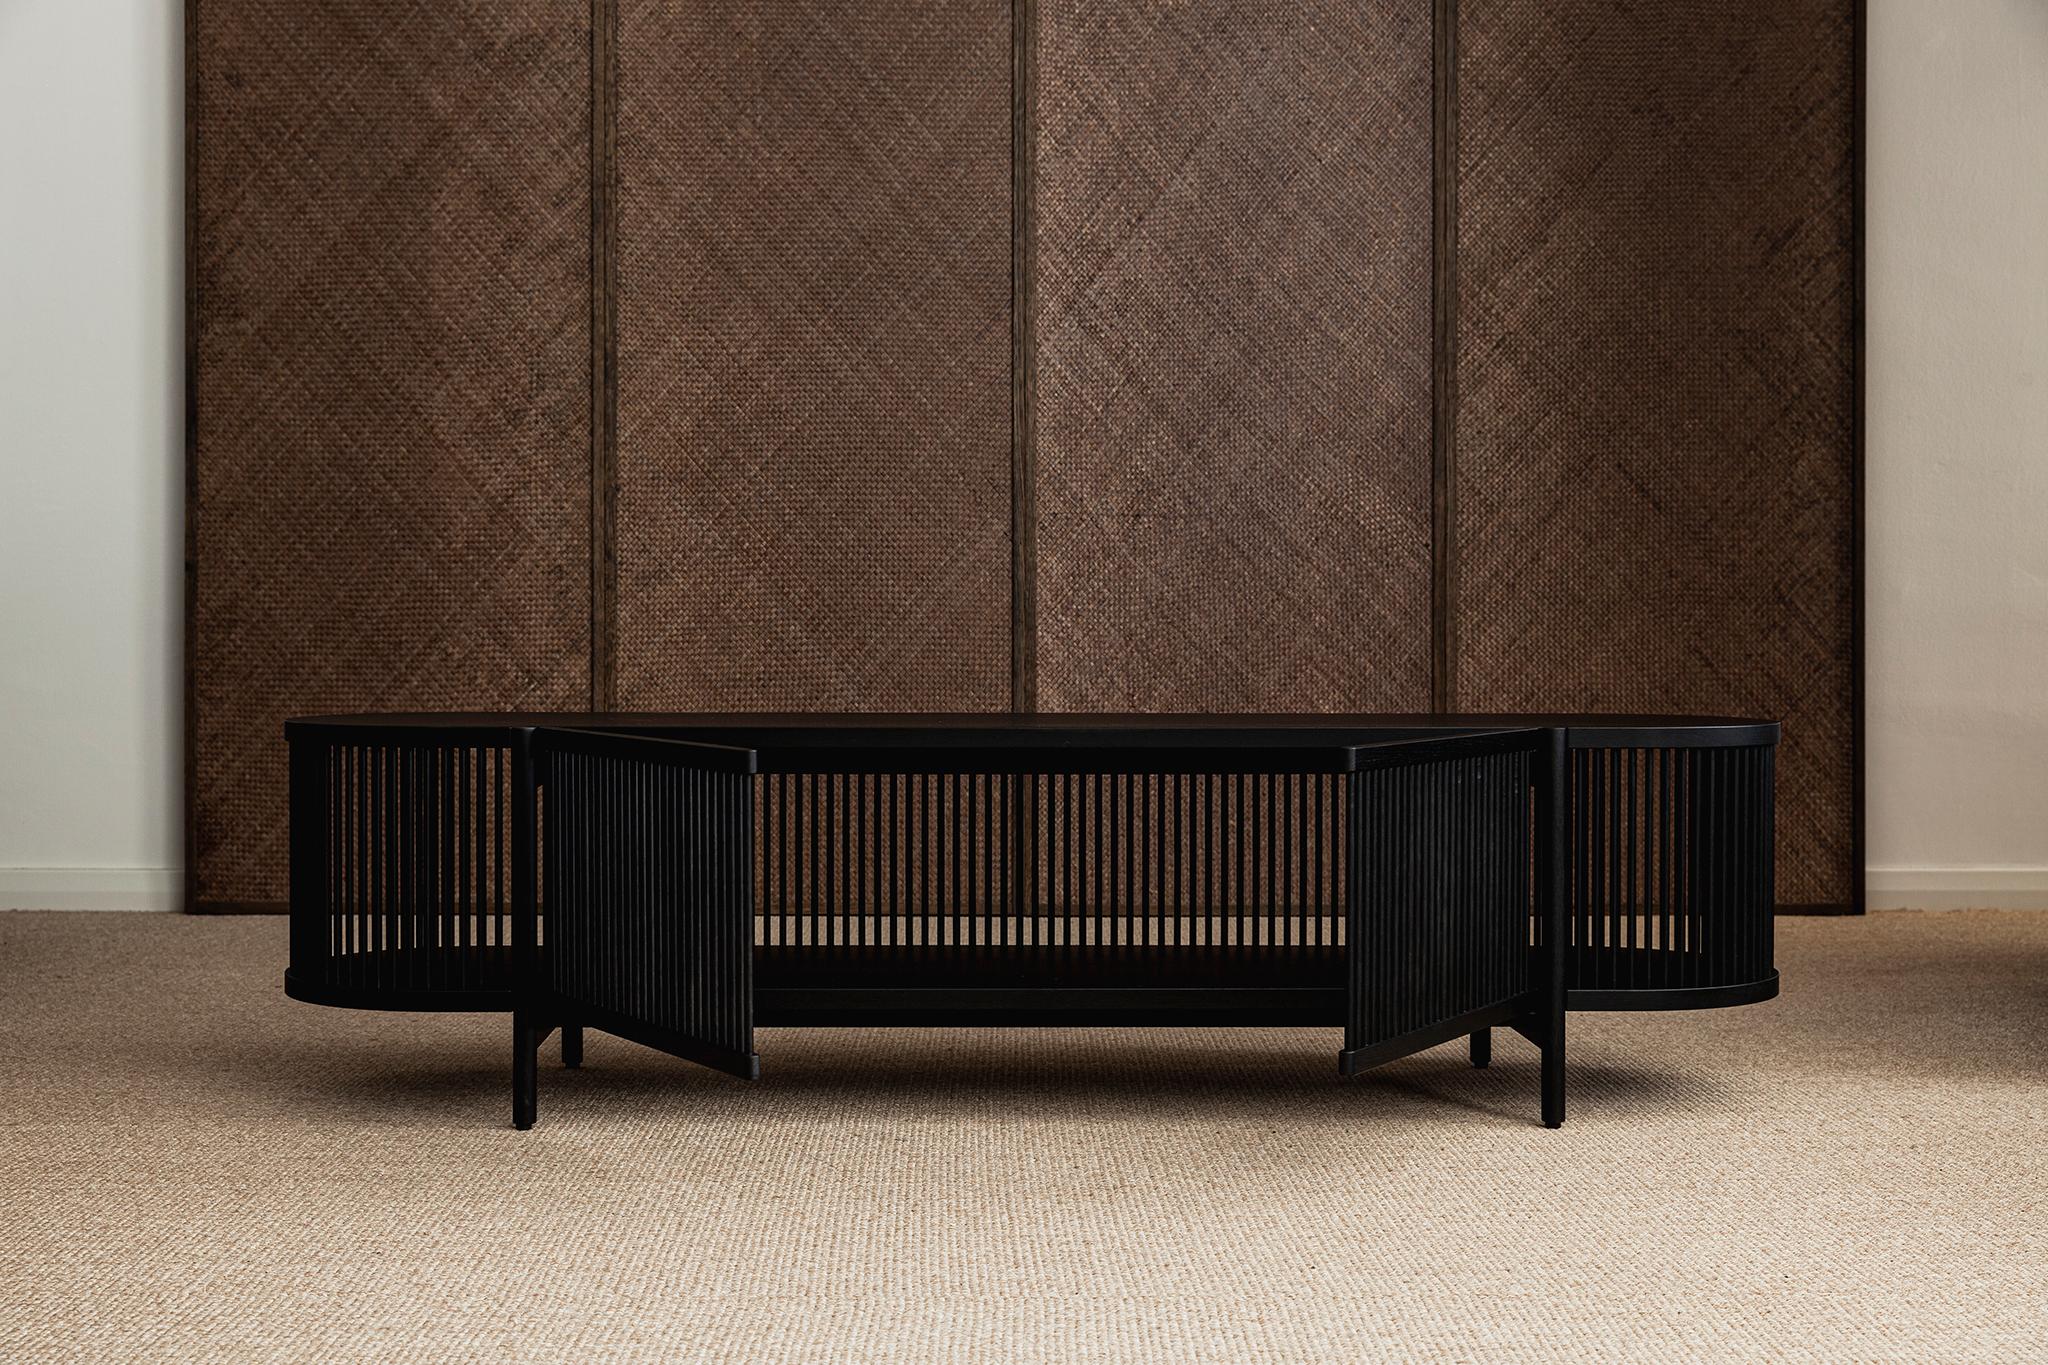 Low sideboard Bastone // black oak 
Designed by Antrei Hartikainen, 2022

Dimensions : H. 50 cm / W. 200 cm / D. 53 cm

Model shown in the picture : 
- Color : Black oak 
- With doors

Designed by the award-winning master cabinet maker and